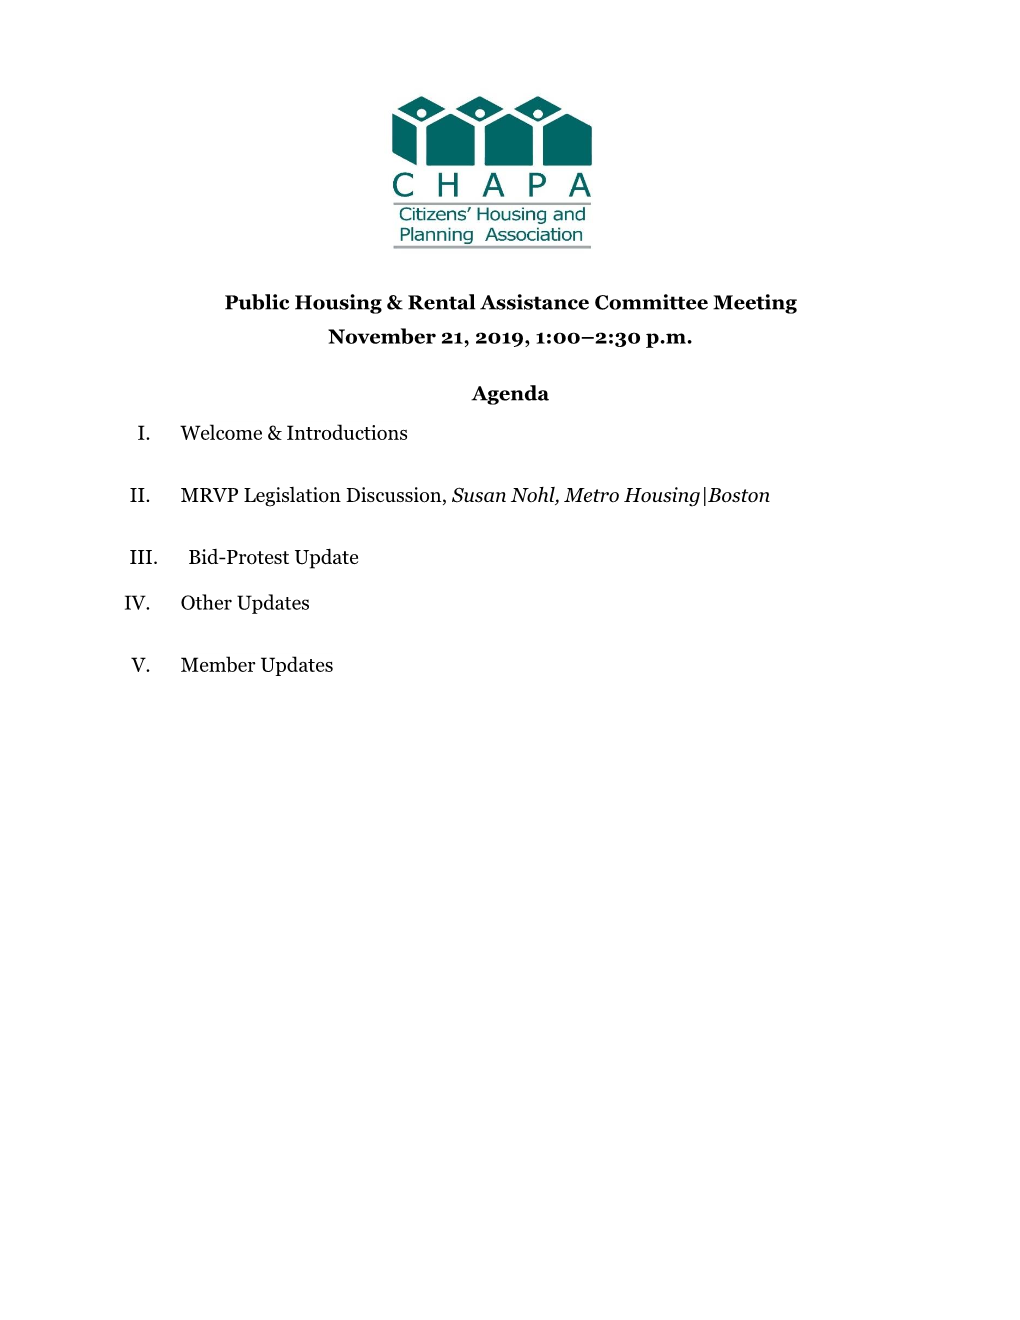 Public Housing & Rental Assistance Committee Meeting November 21, 2019, 1:00–2:30 P.M. Agenda I. Welcome & Introducti